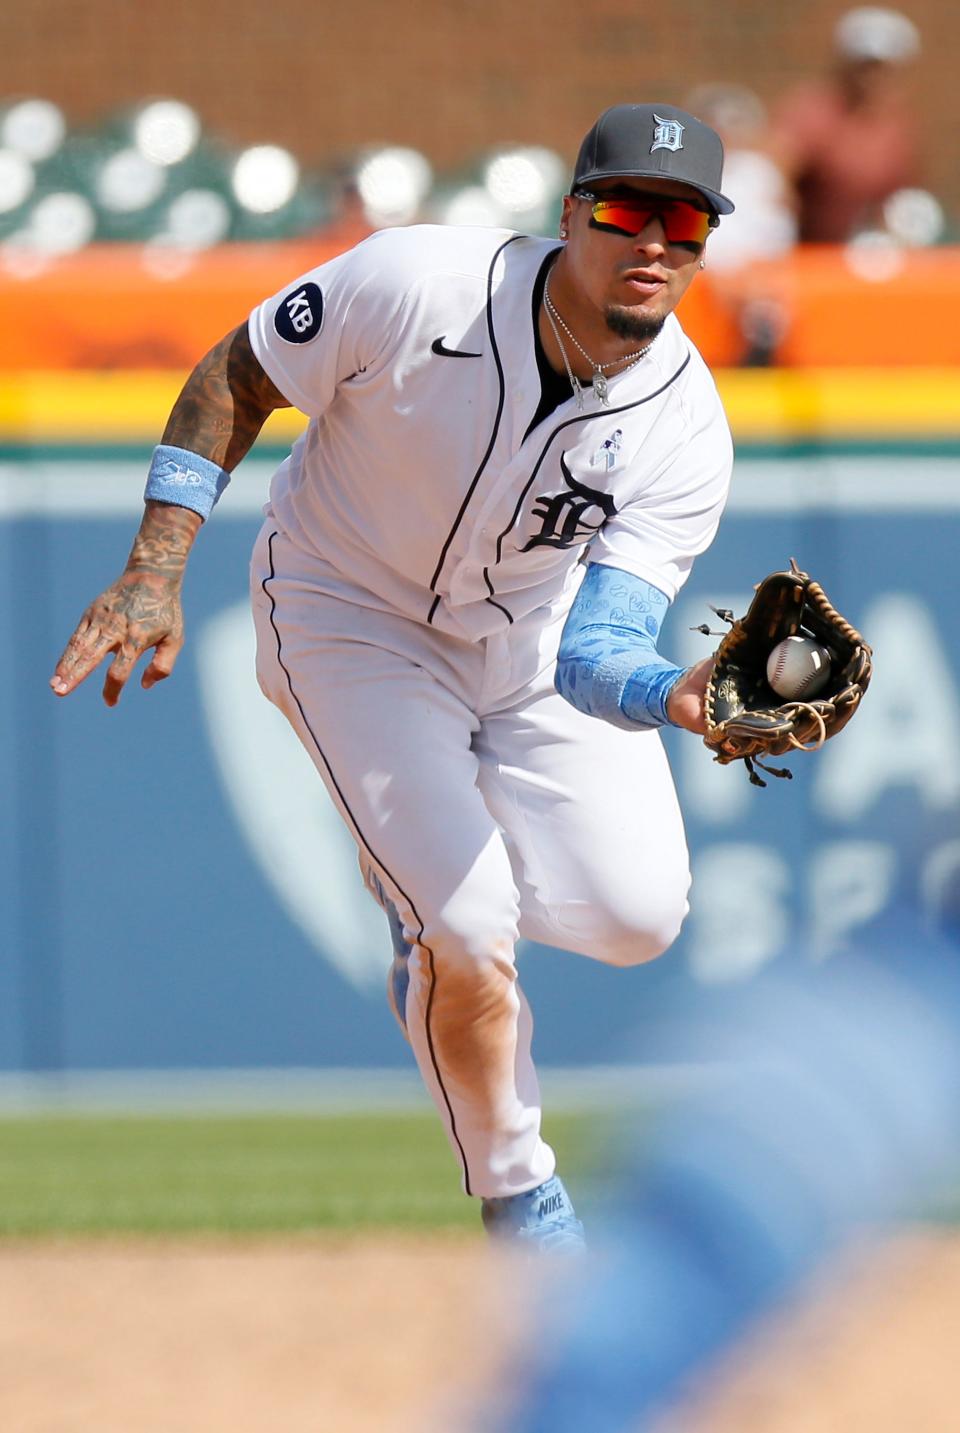 Shortstop Javier Baez (28) of the Detroit Tigers fields a grounder hit by Ezequiel Duran of the Texas Rangers for an out during the ninth inning at Comerica Park on June 19, 2022, in Detroit, Michigan.